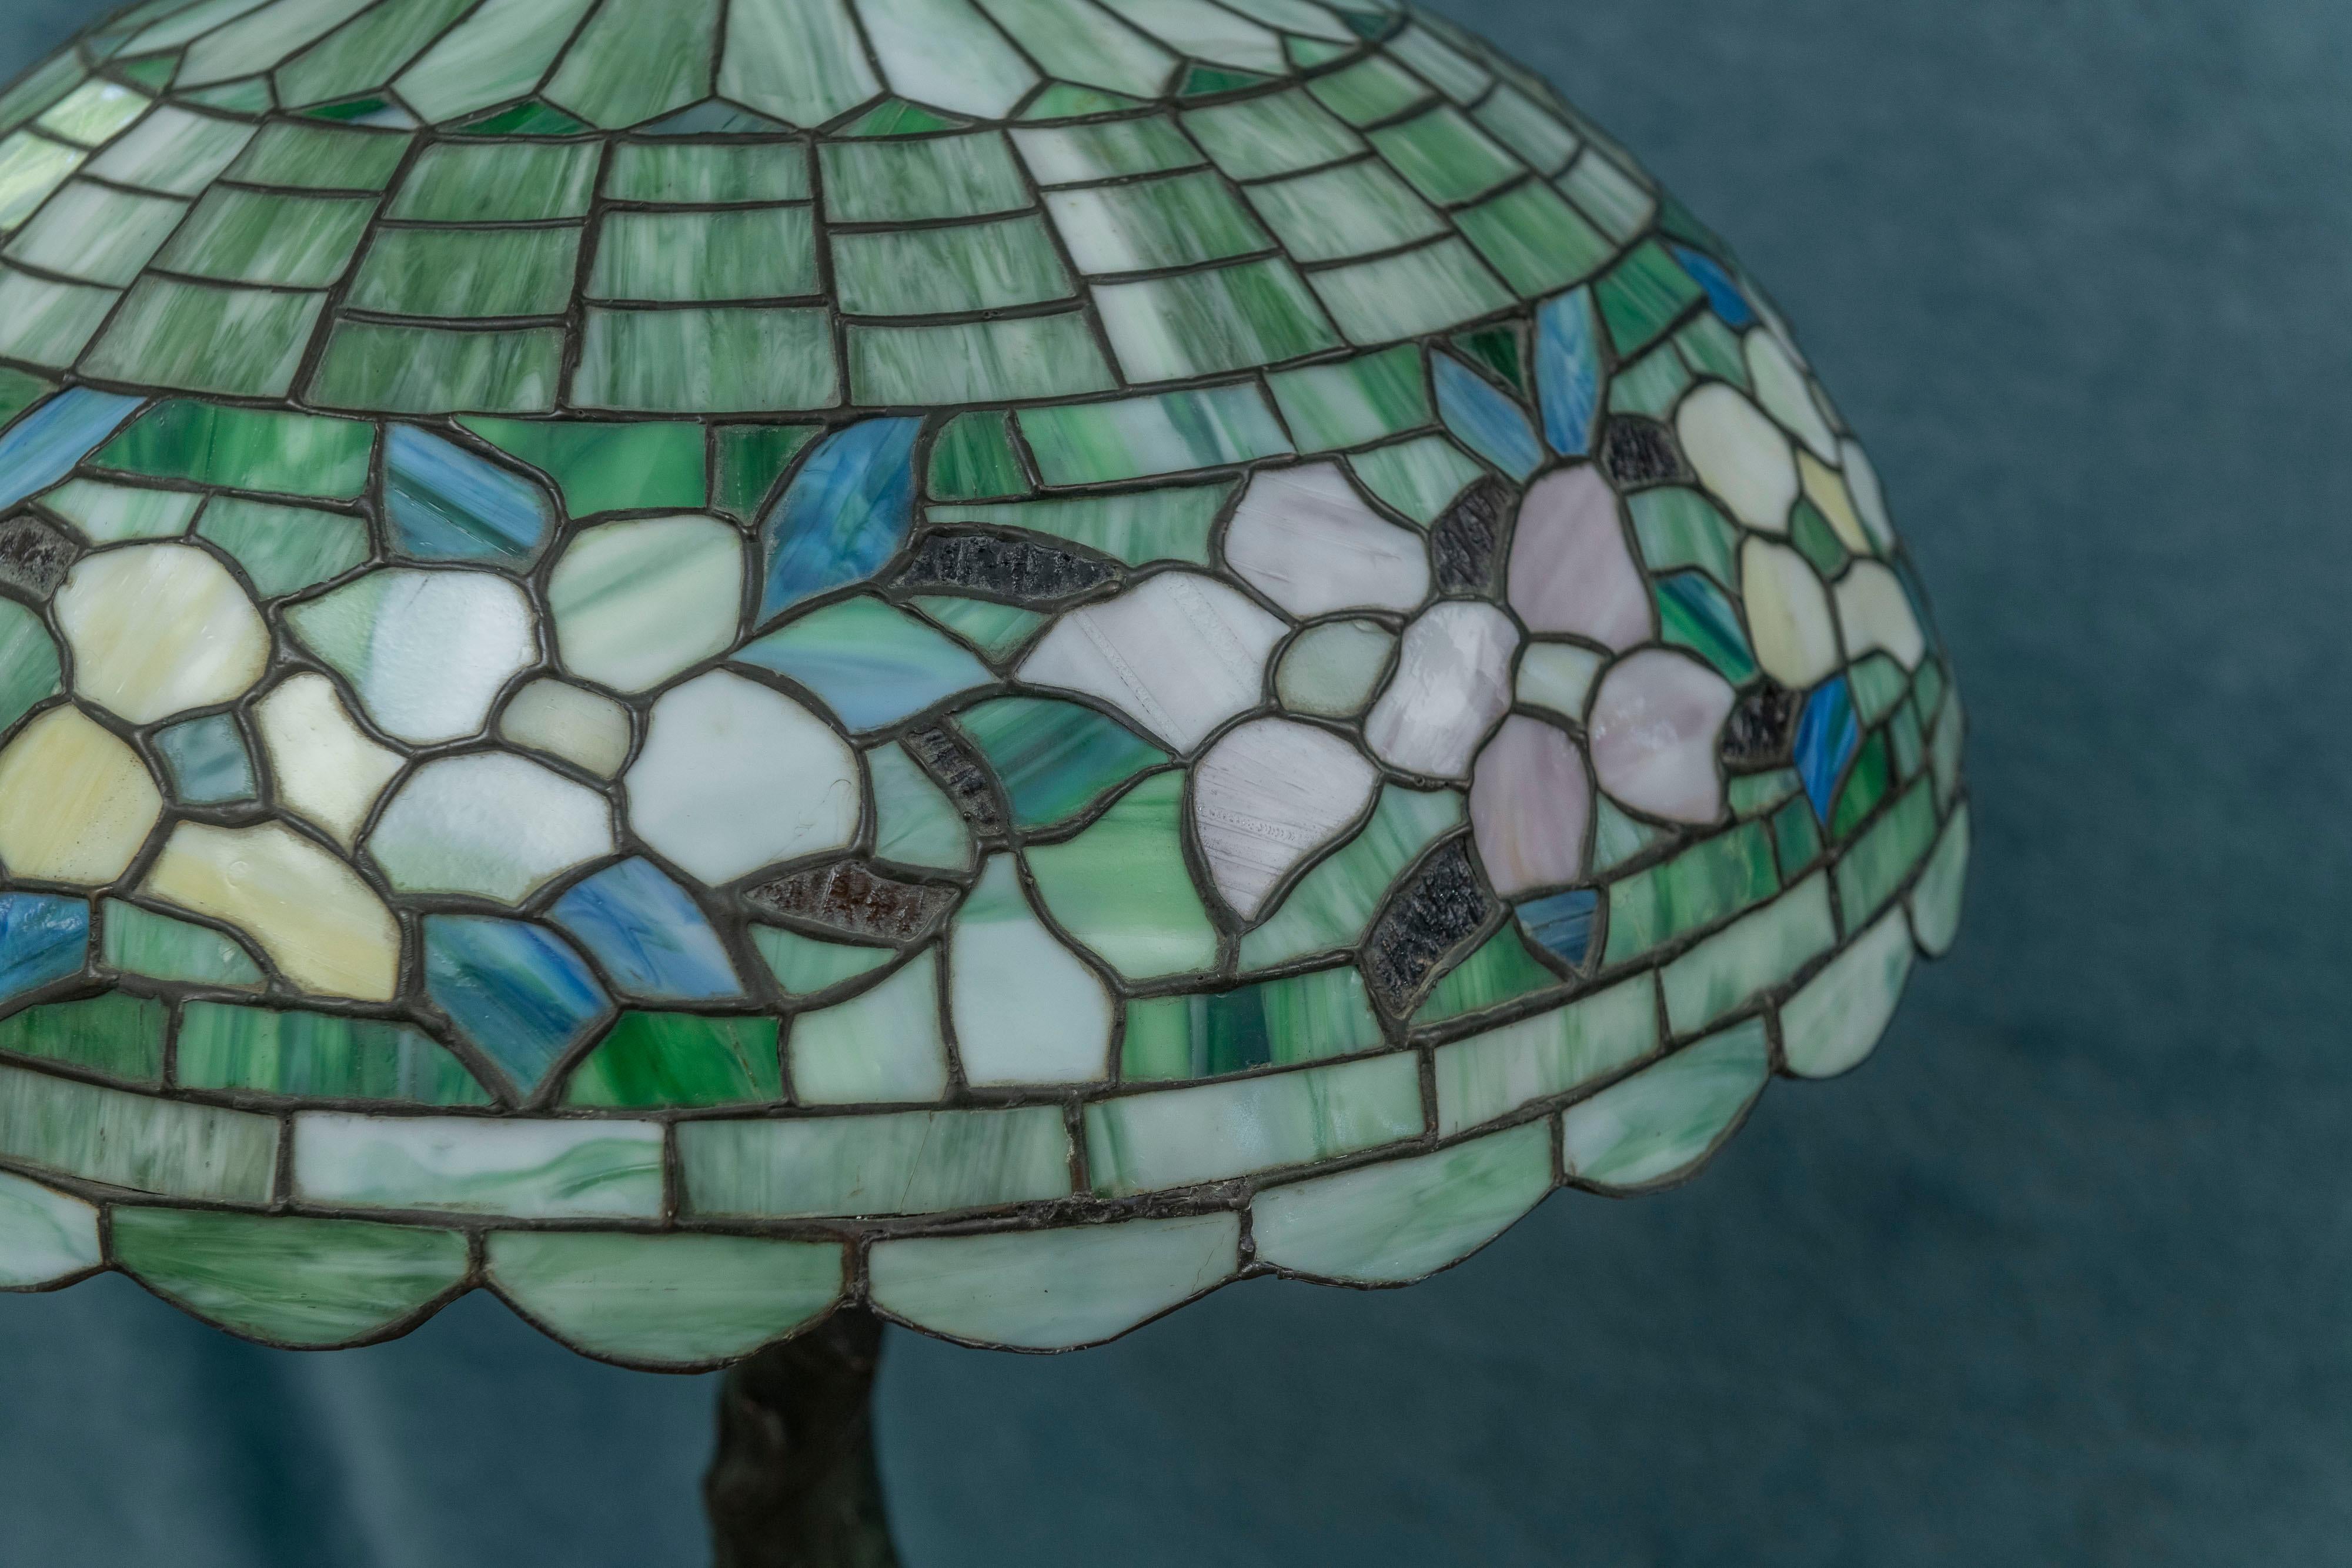 Large Antique Leaded Glass Table Lamp by Wilkinson Co. B'klyn N.Y ca. 1910 For Sale 2